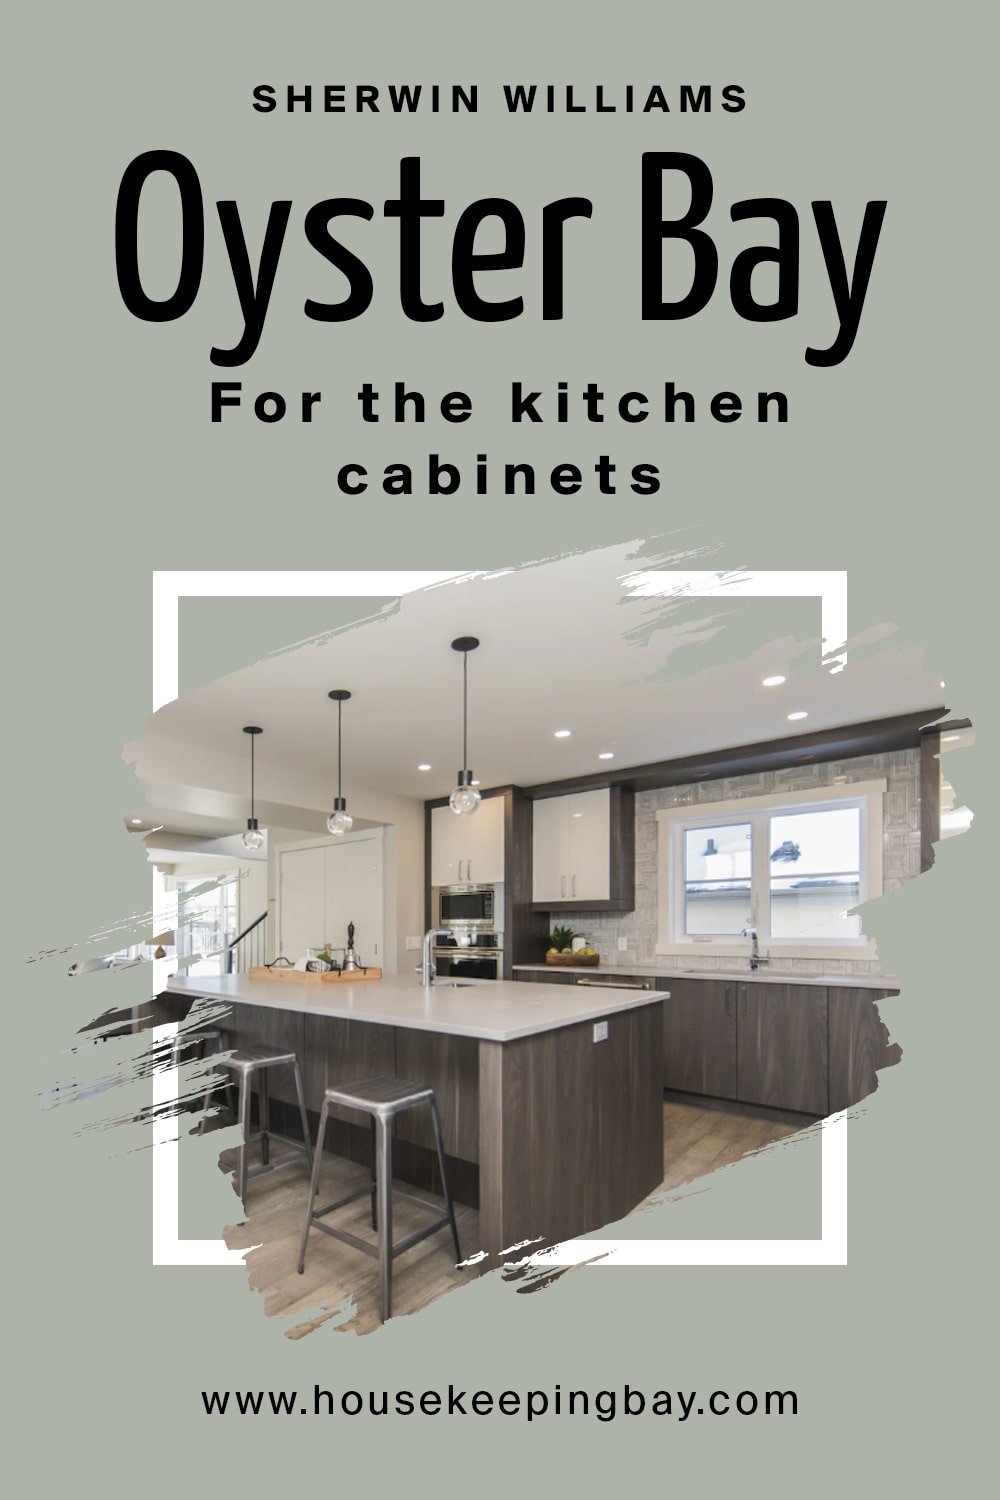 Sherwin Williams. Oyster Bay For the kitchen Cabinets